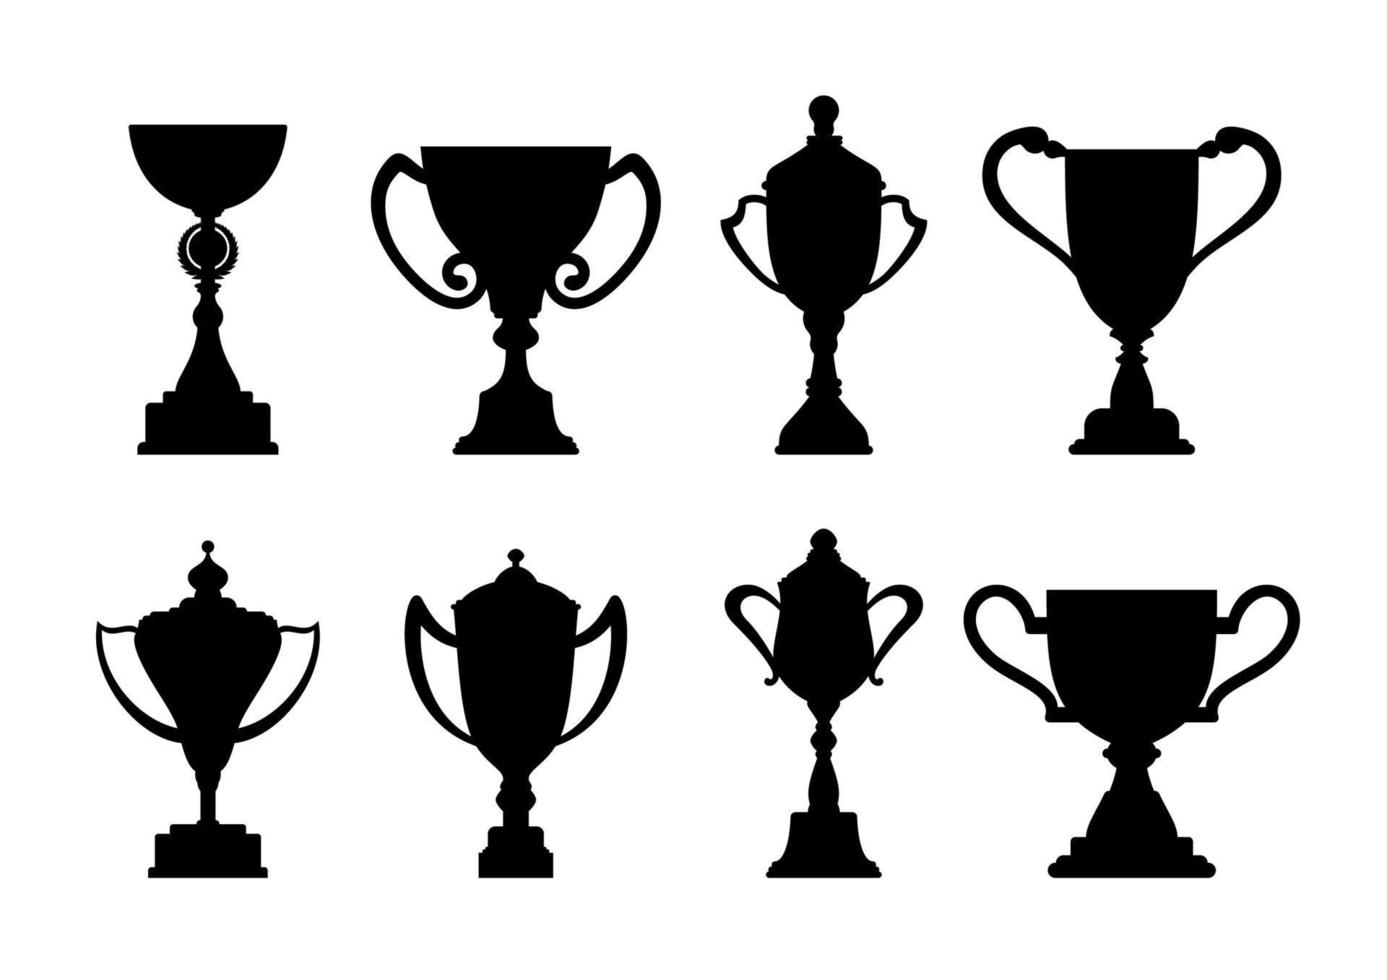 Sport trophies and awards vector